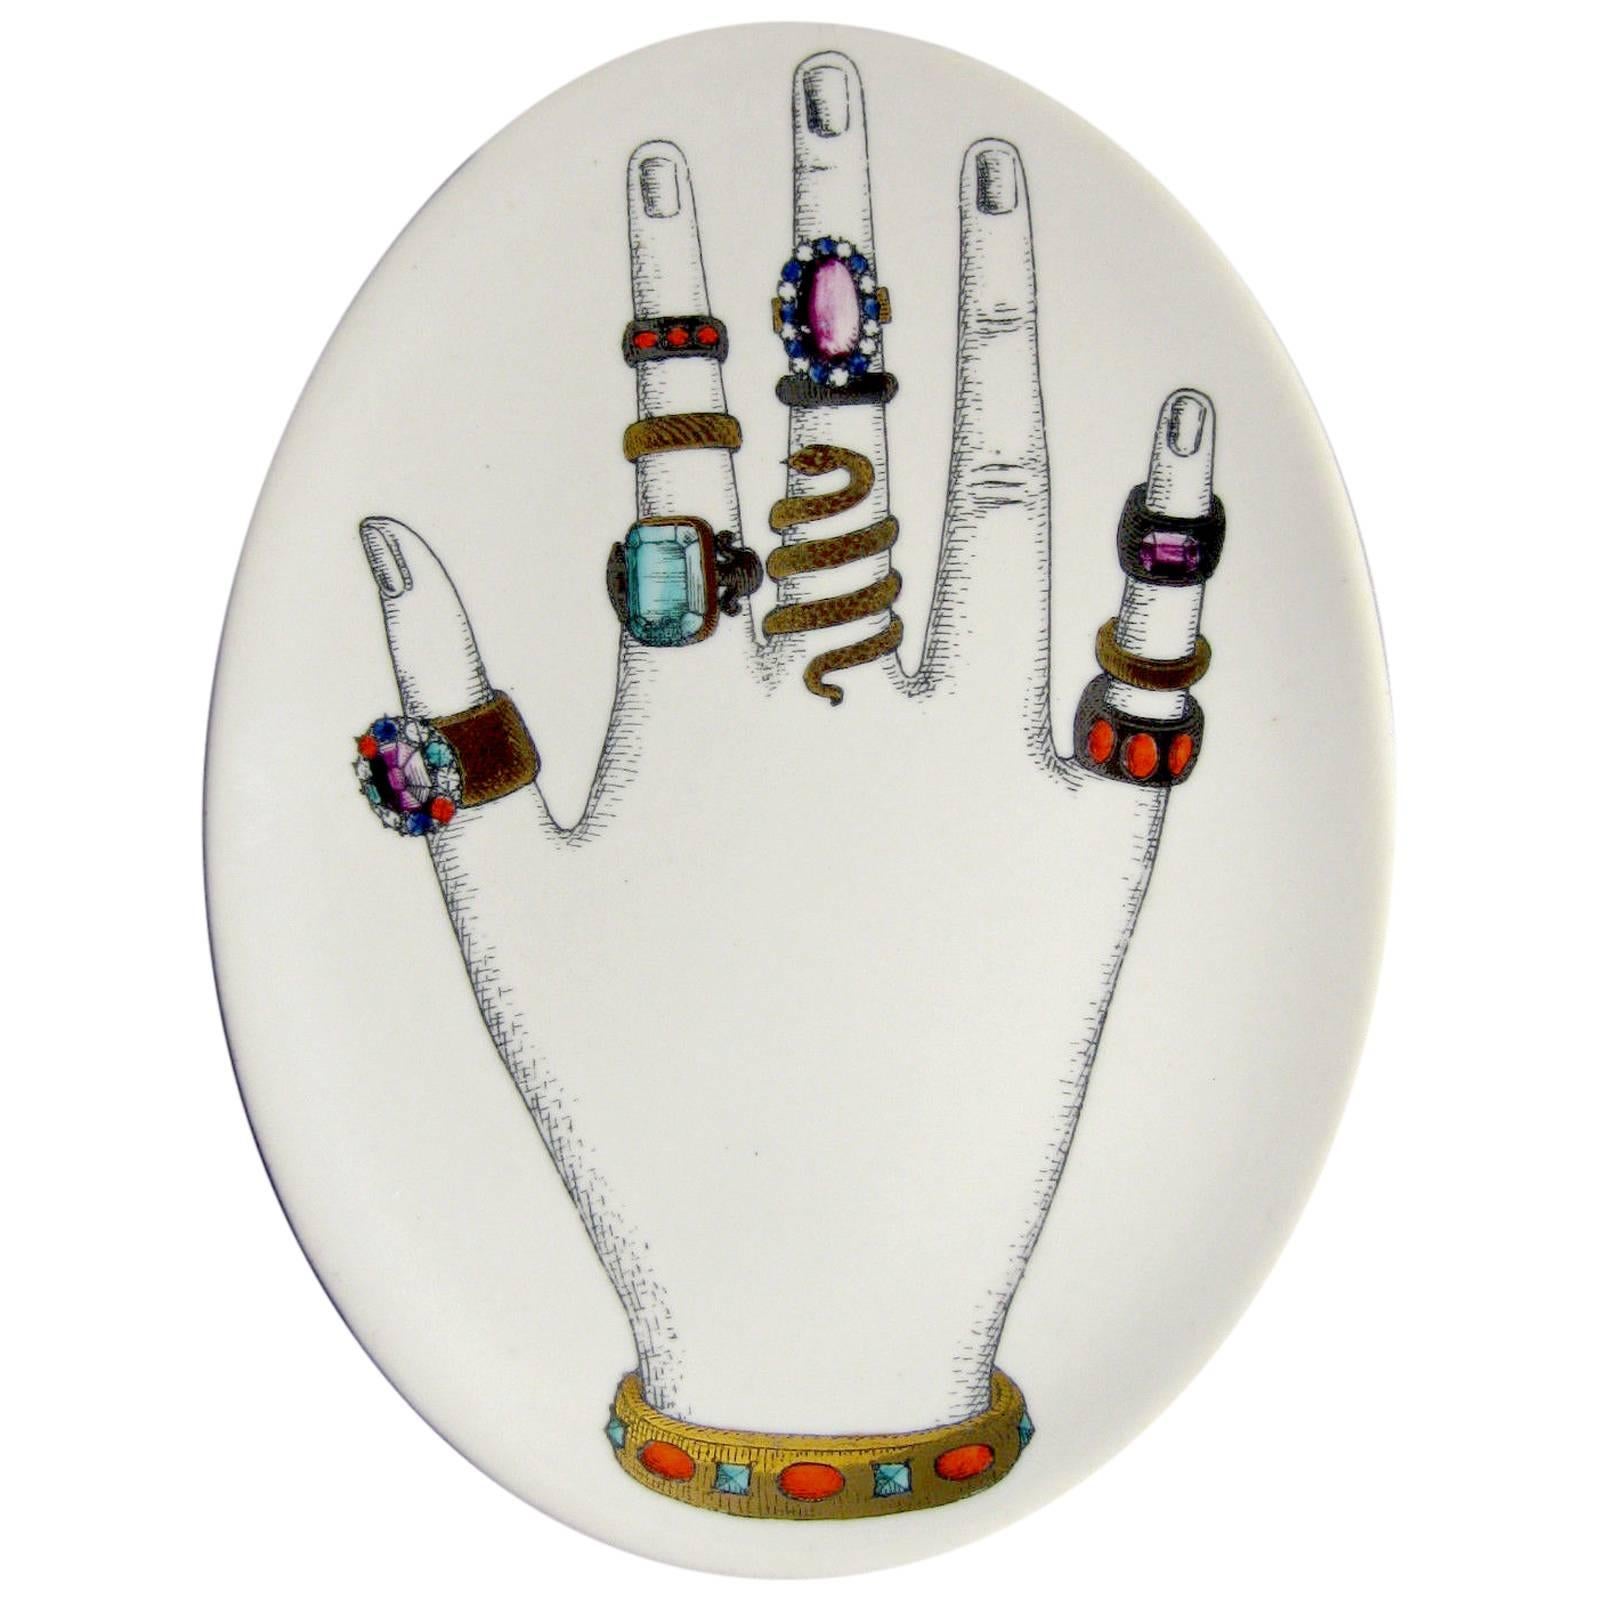 Vintage Piero Fornasetti Dish with Hand and Rings